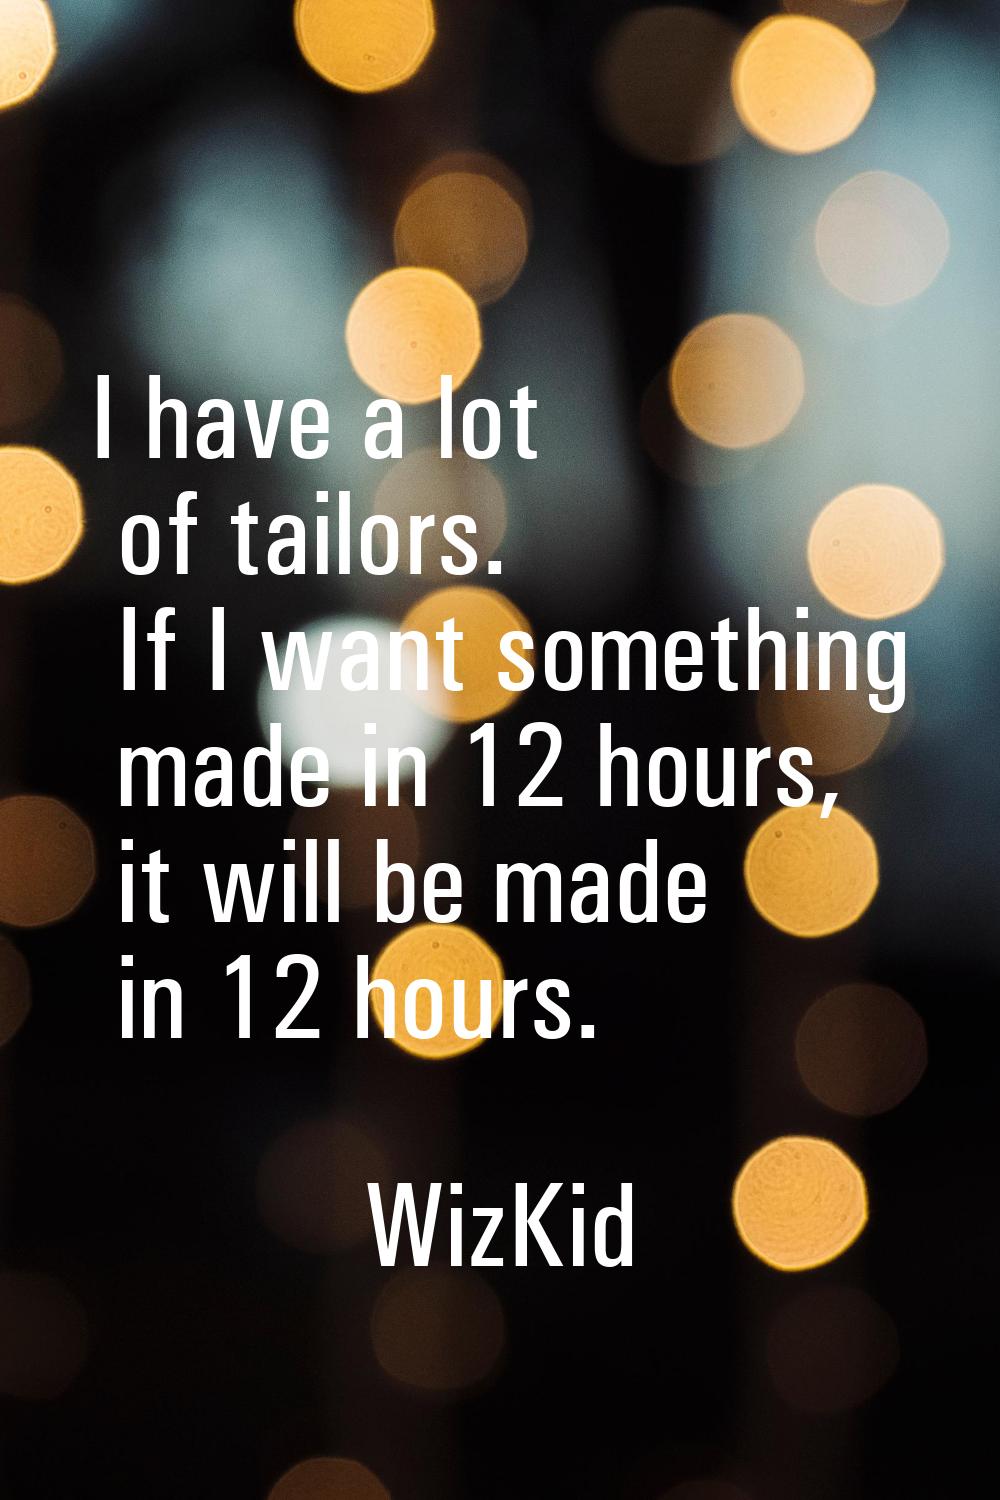 I have a lot of tailors. If I want something made in 12 hours, it will be made in 12 hours.